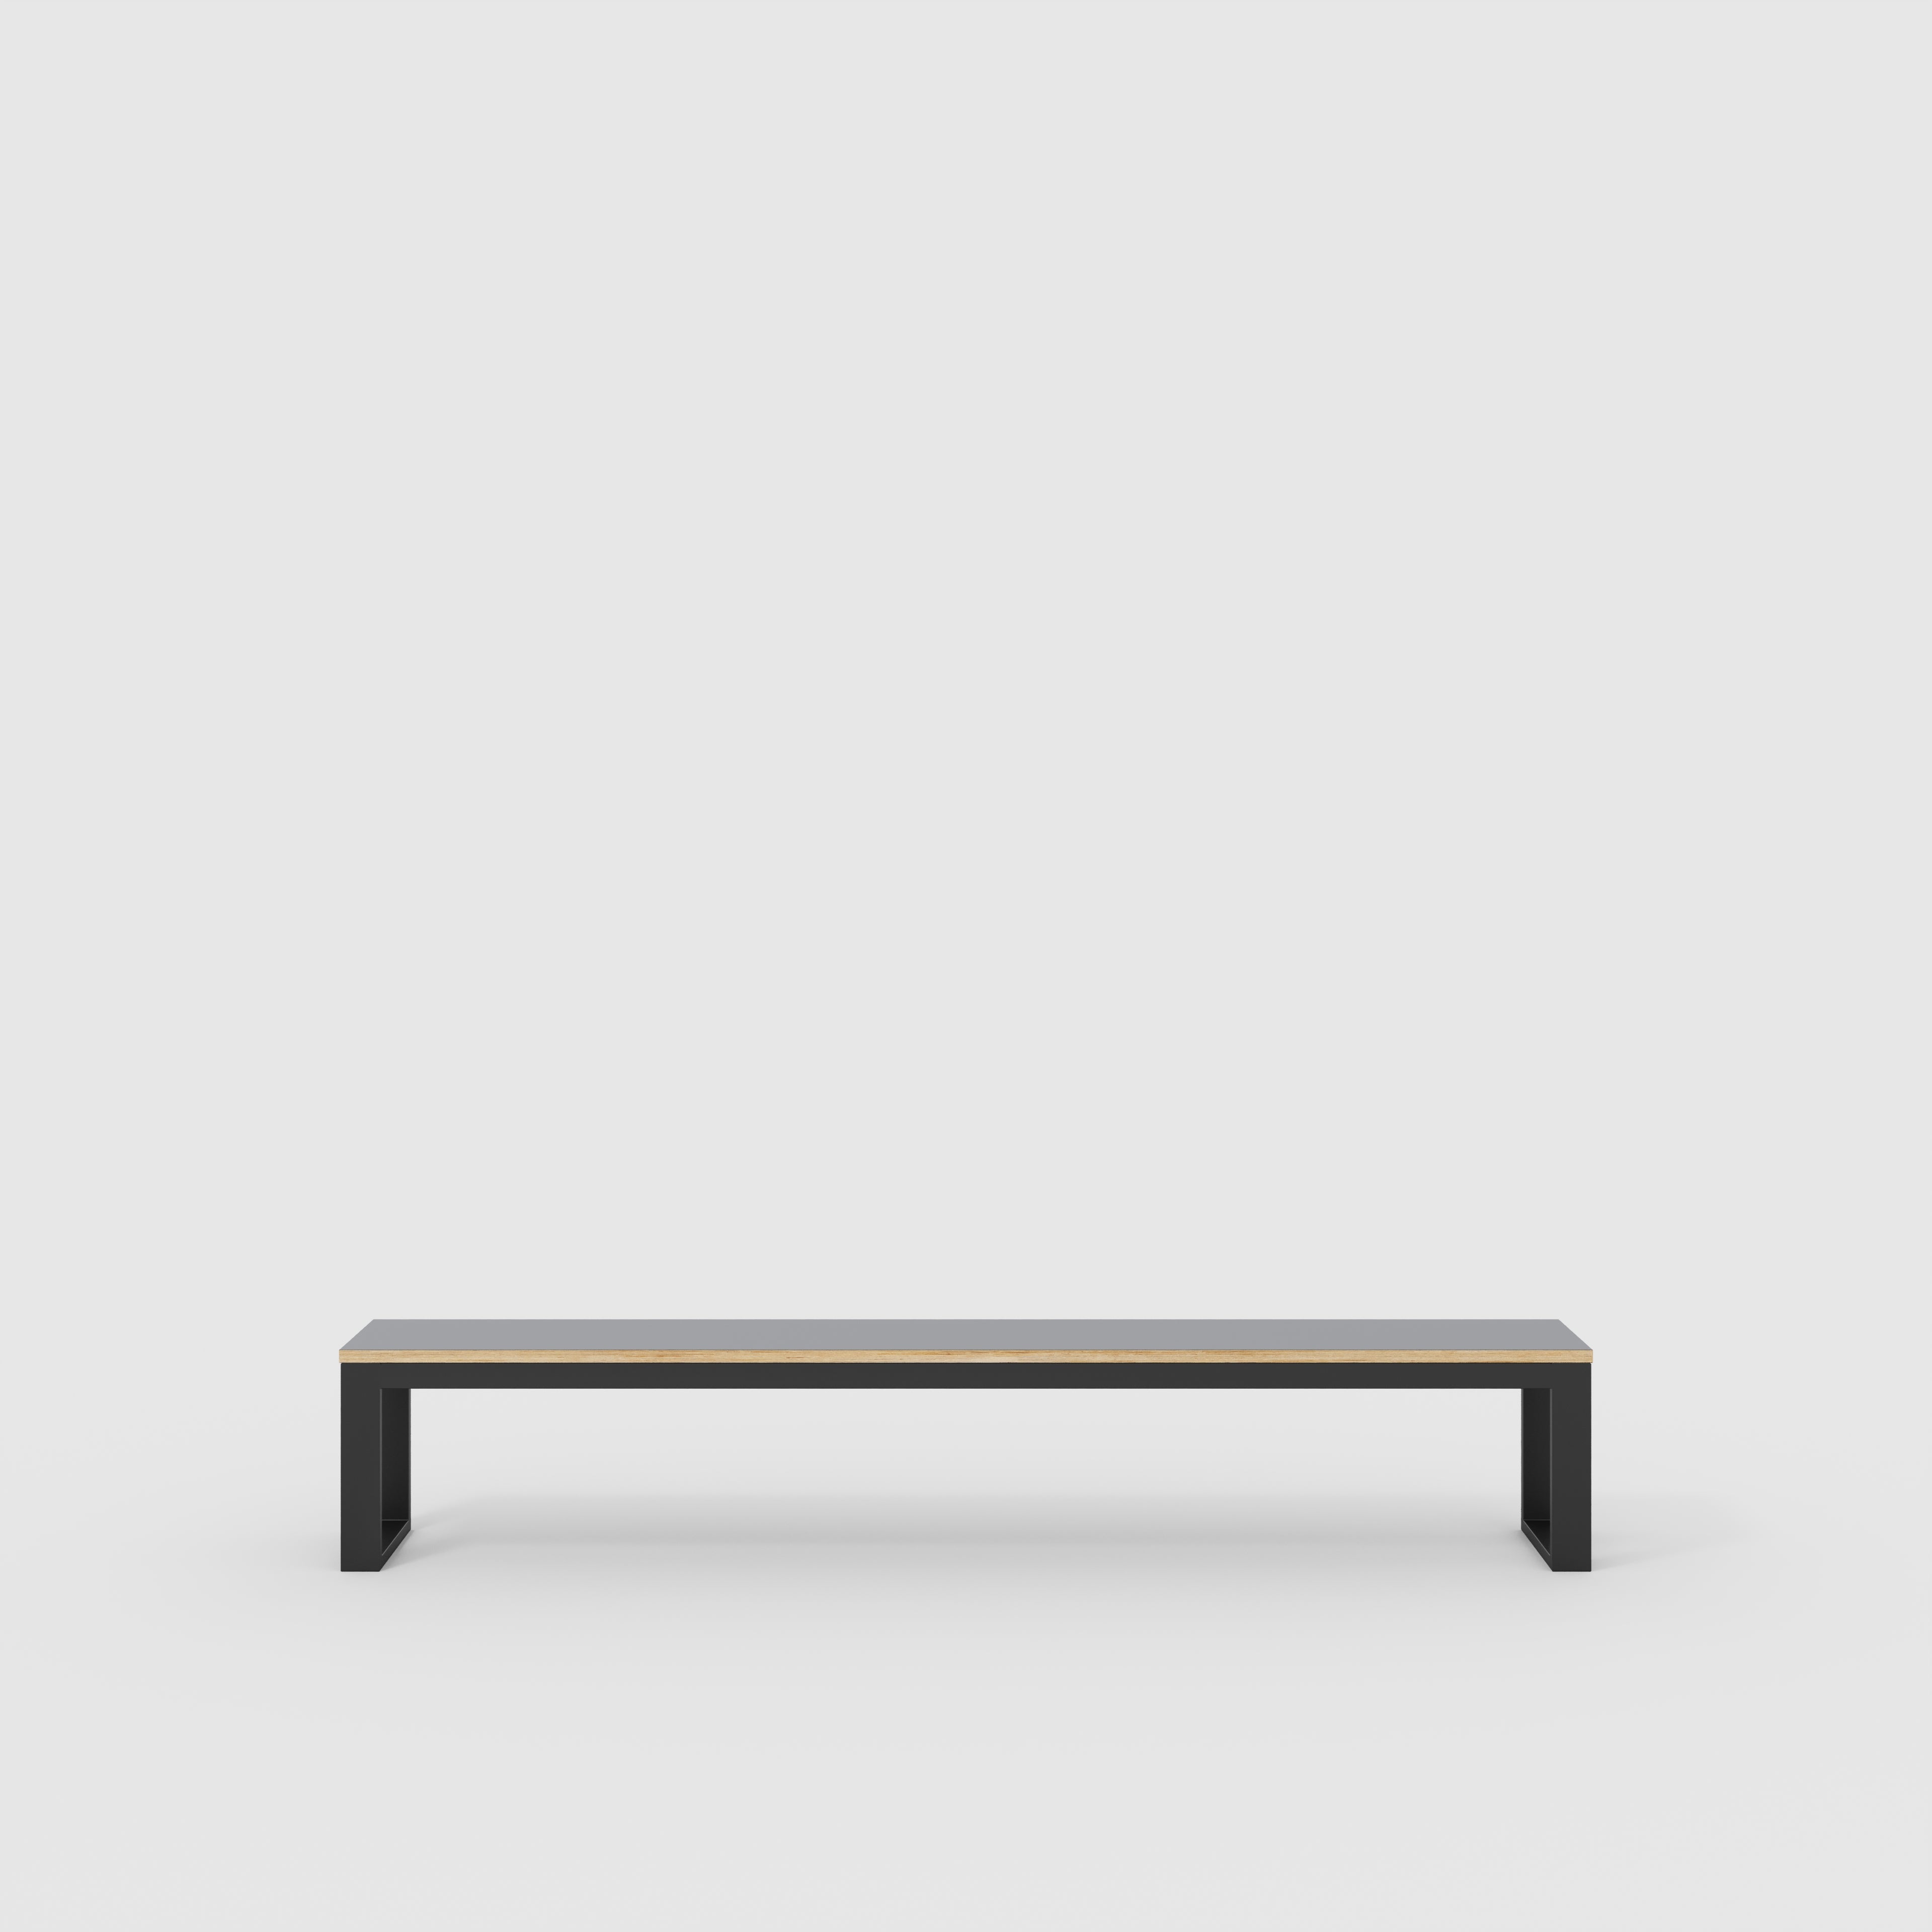 Bench Seat with Black Industrial Frame - Formica Tornado Grey - 2400(w) x 325(d)